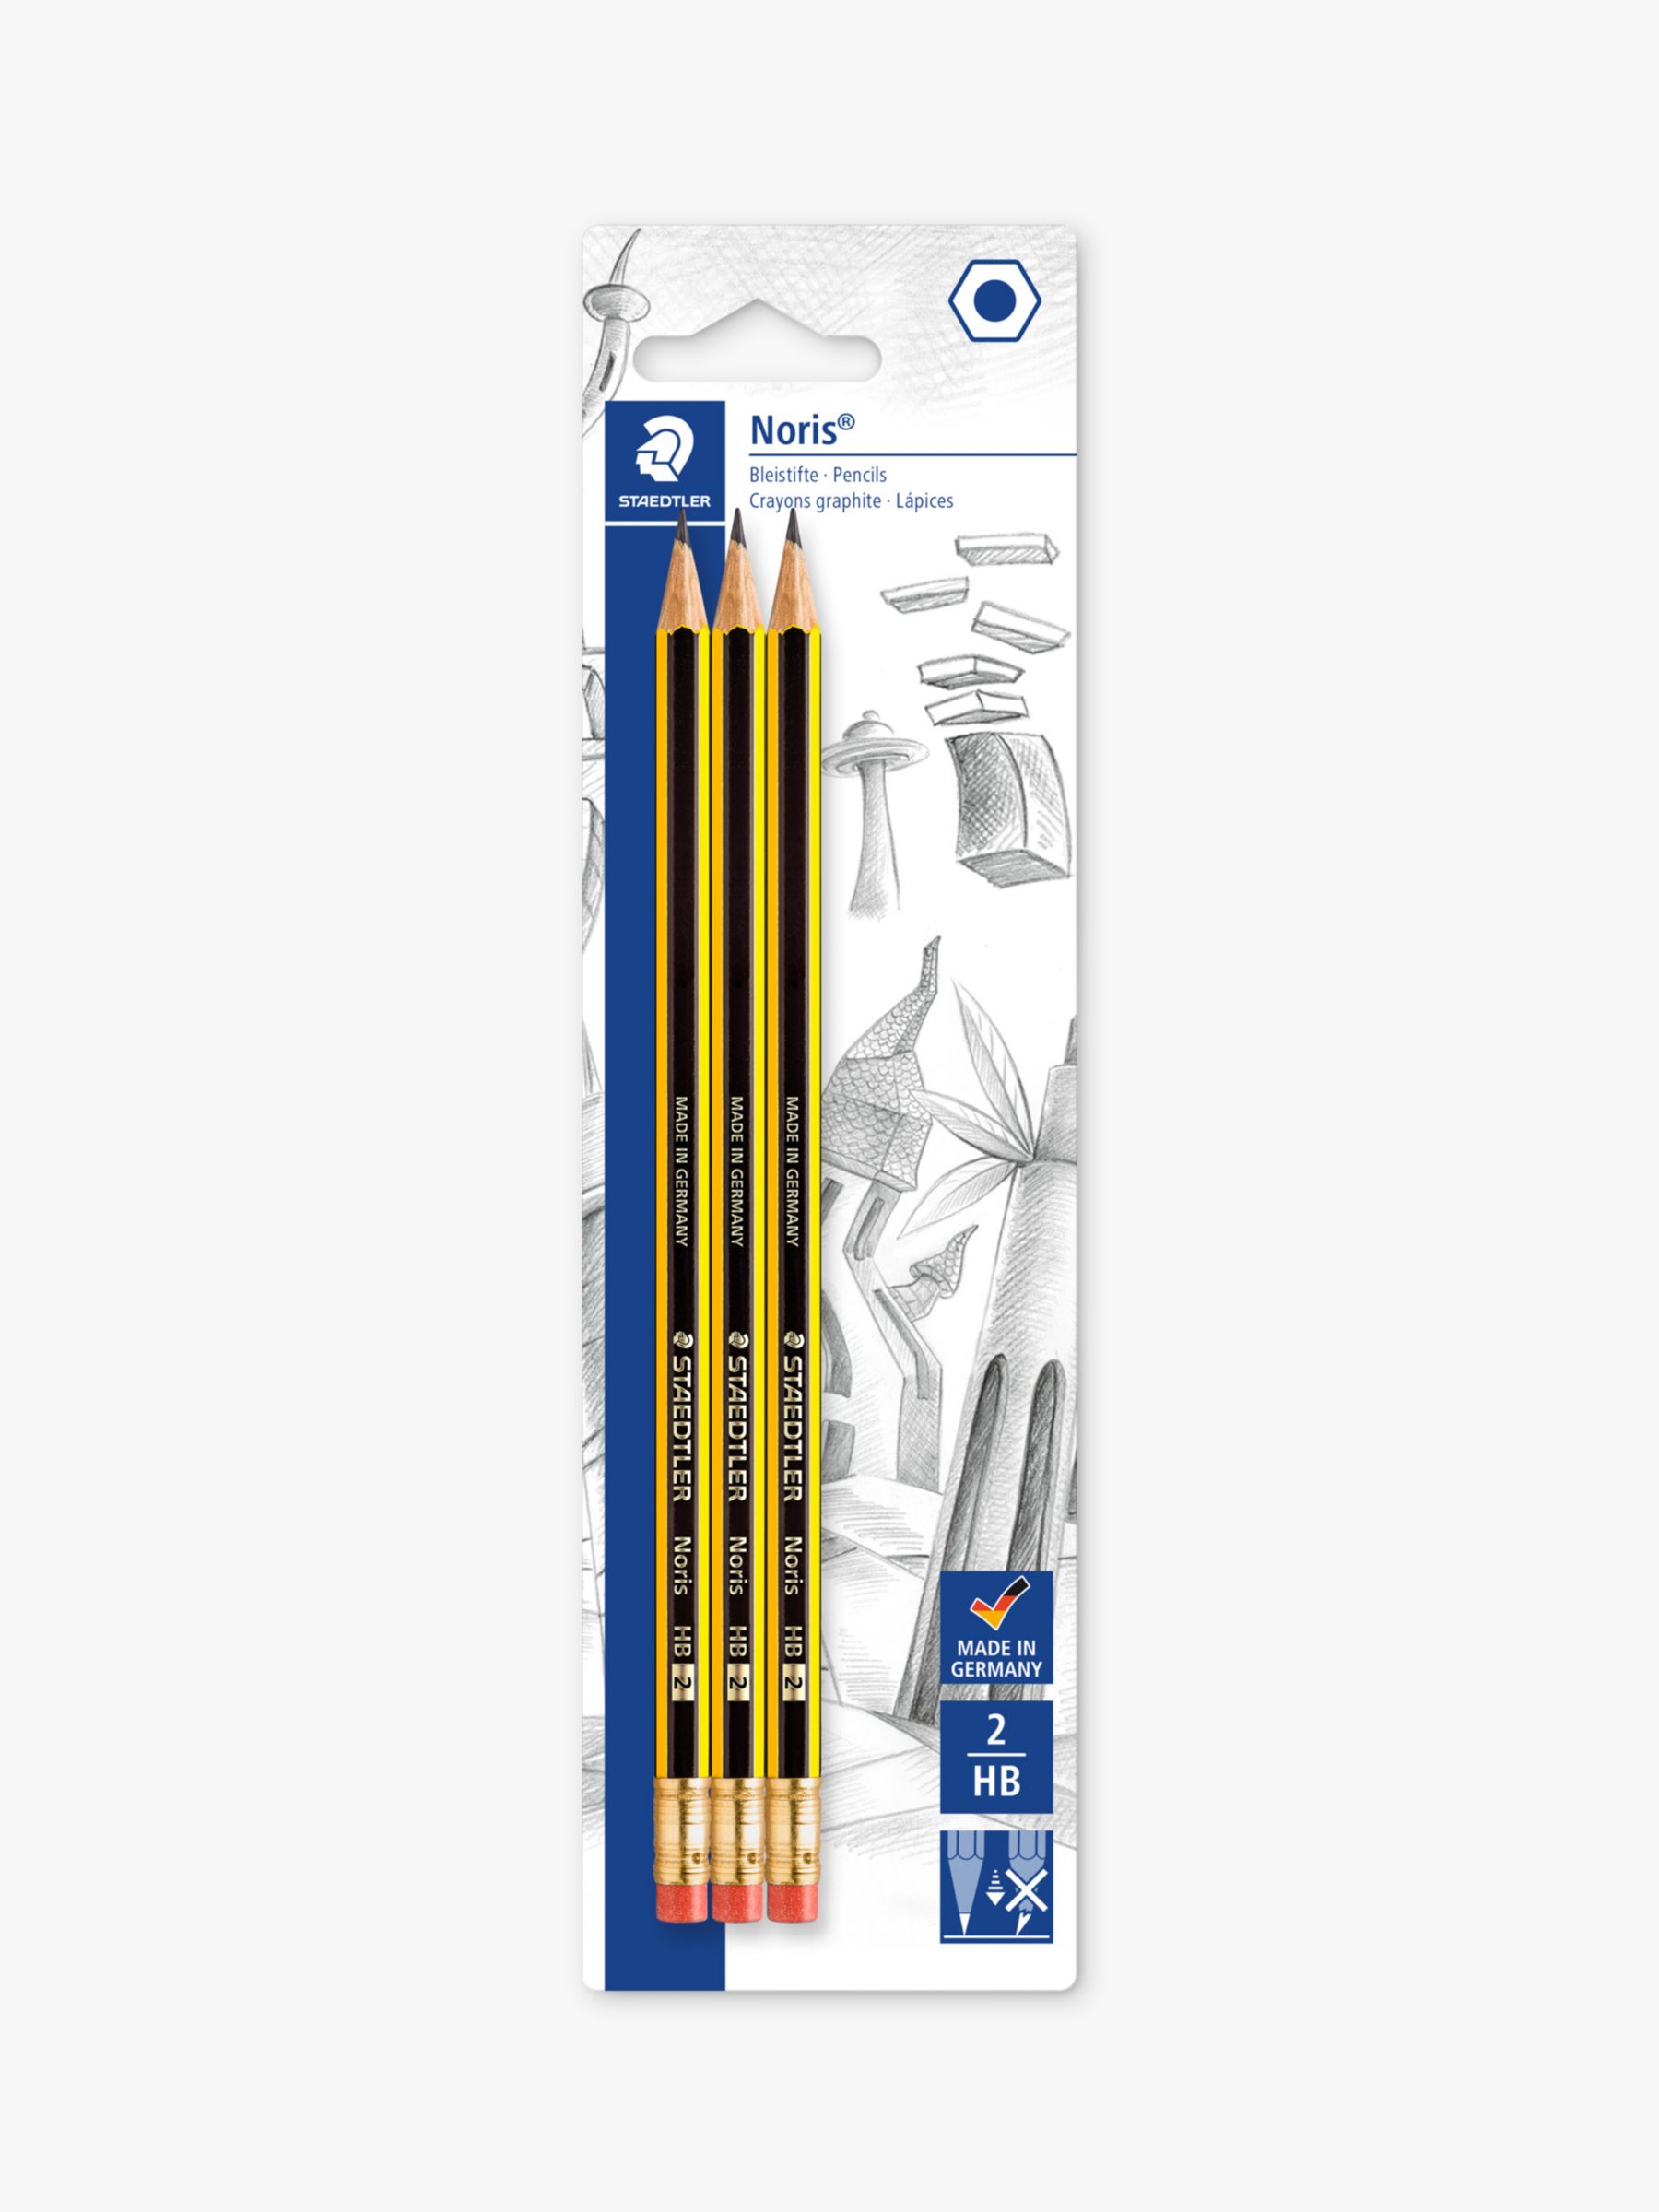 Staedtler Yellow And Black pencil with eraser tip at best price in Chennai